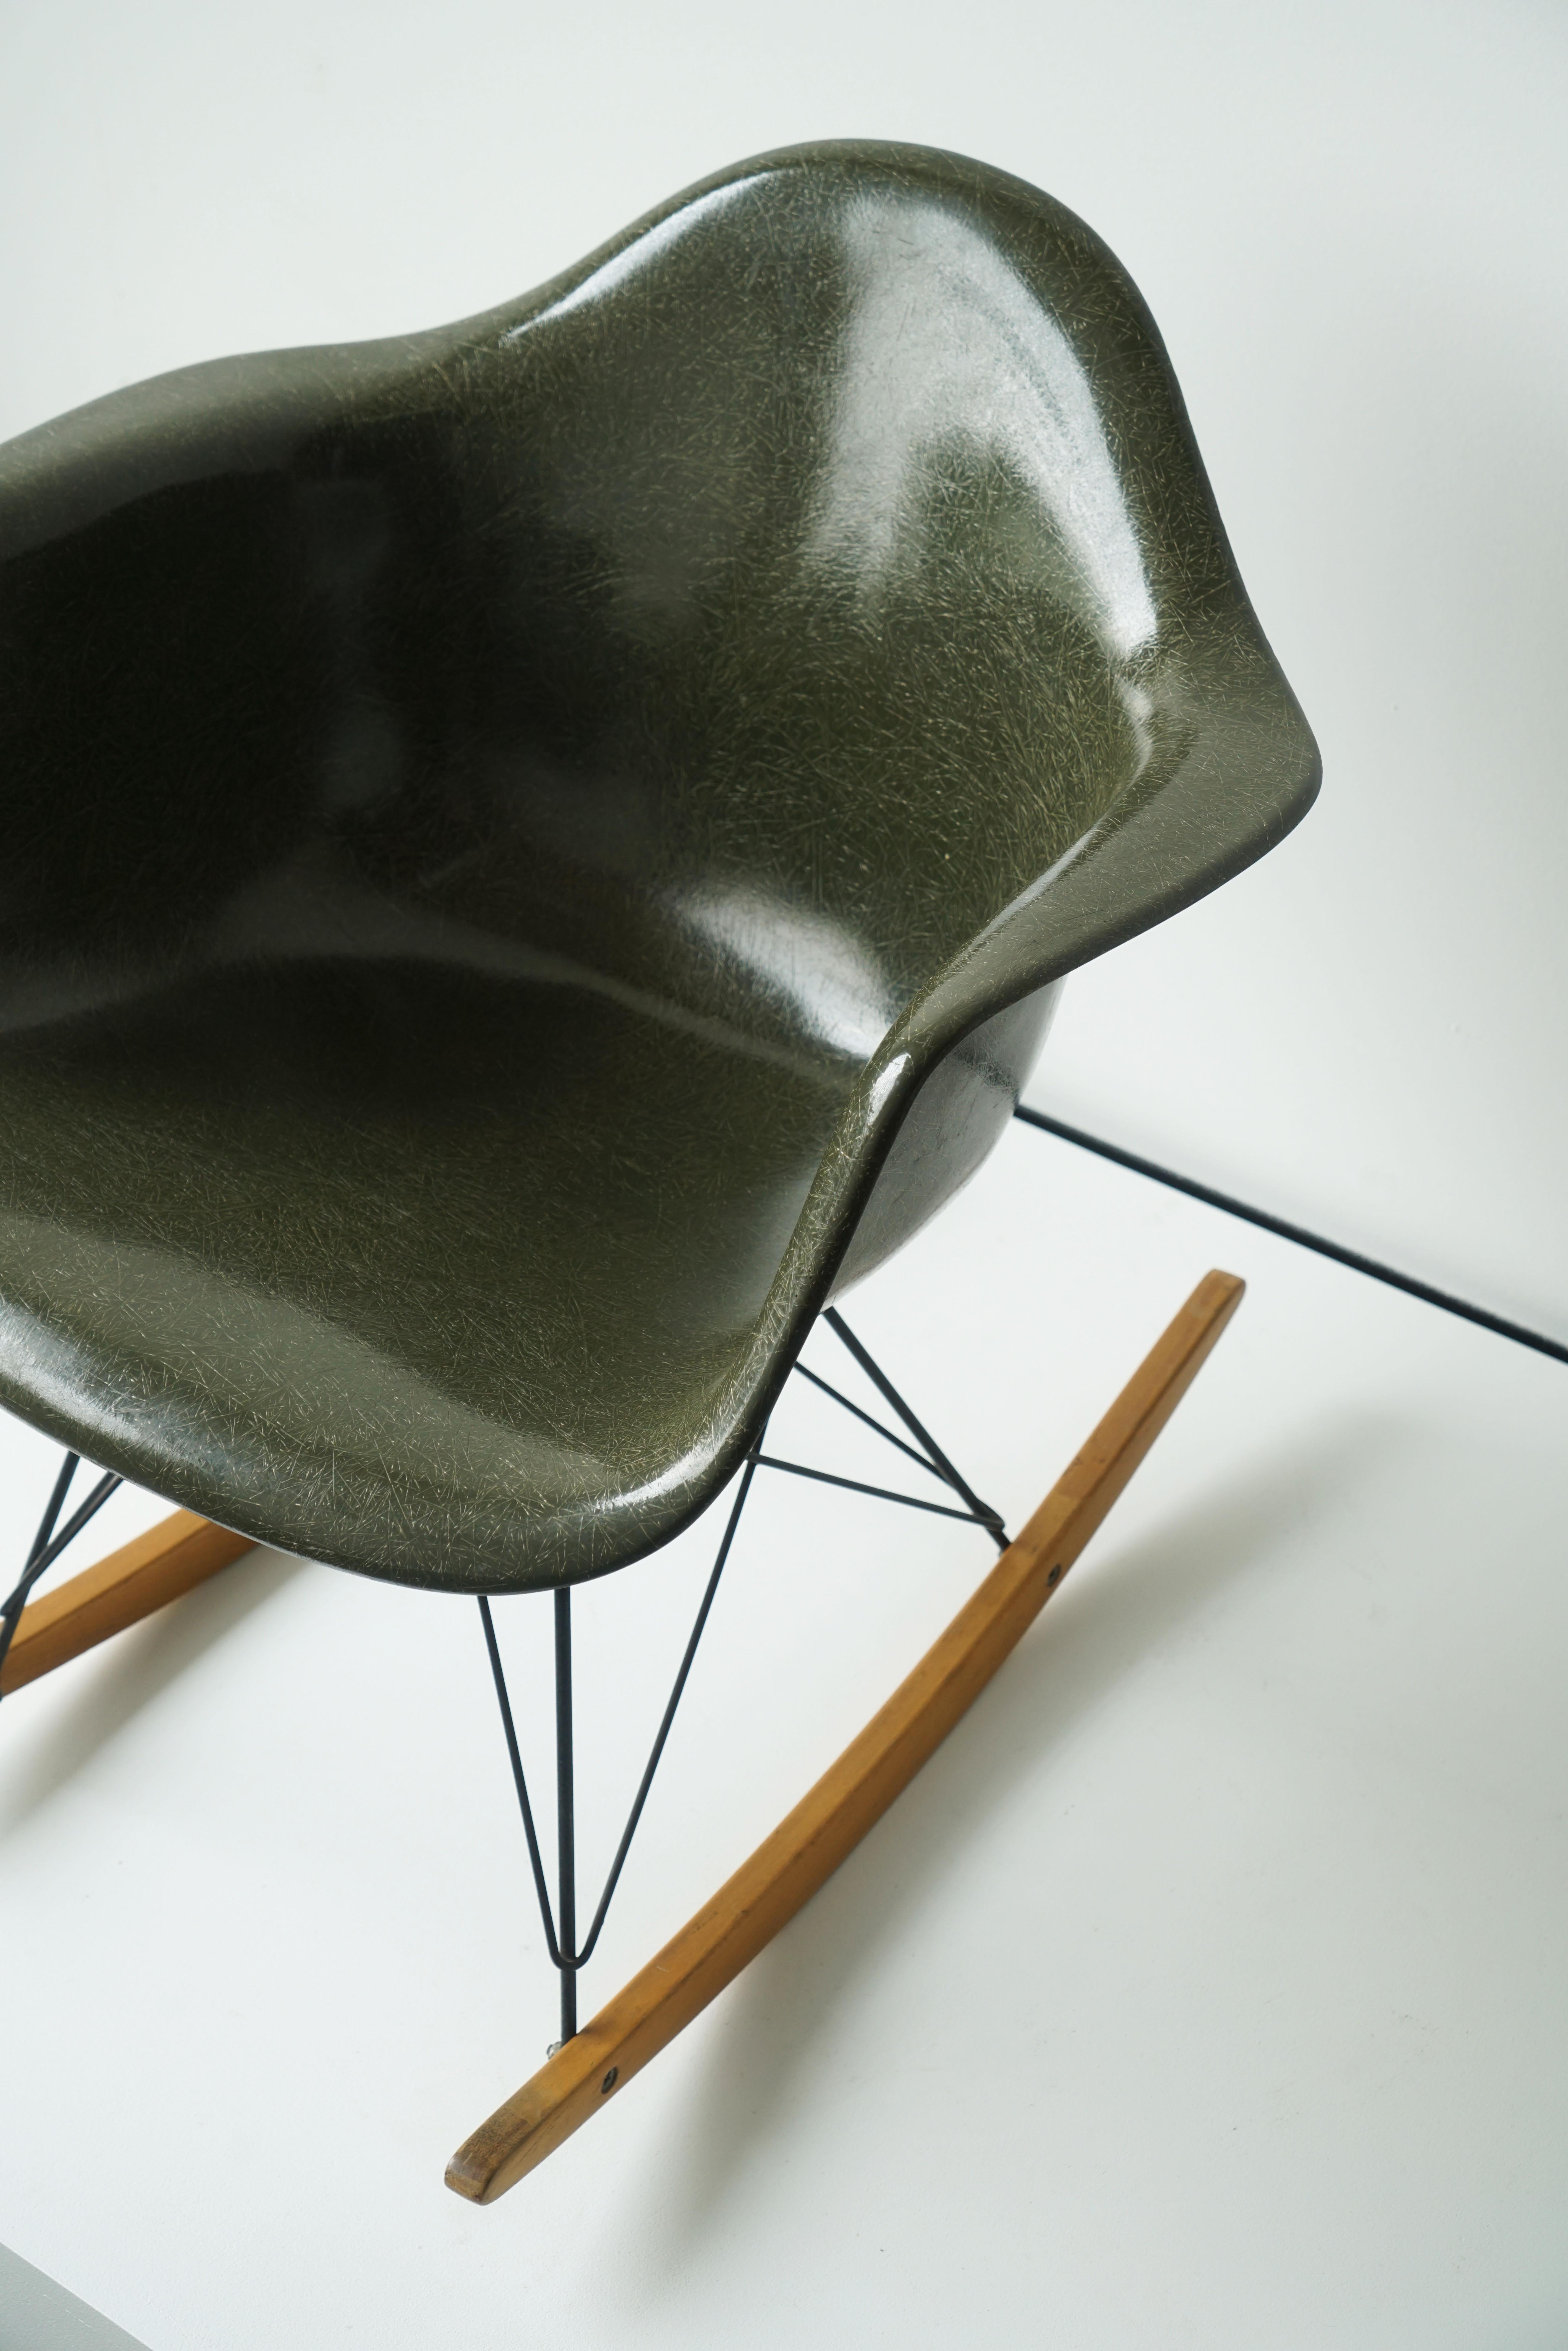 Mid-20th Century Ray and Charles Eames Rar Rocking Chair Herman Miller, Forest Green 1965